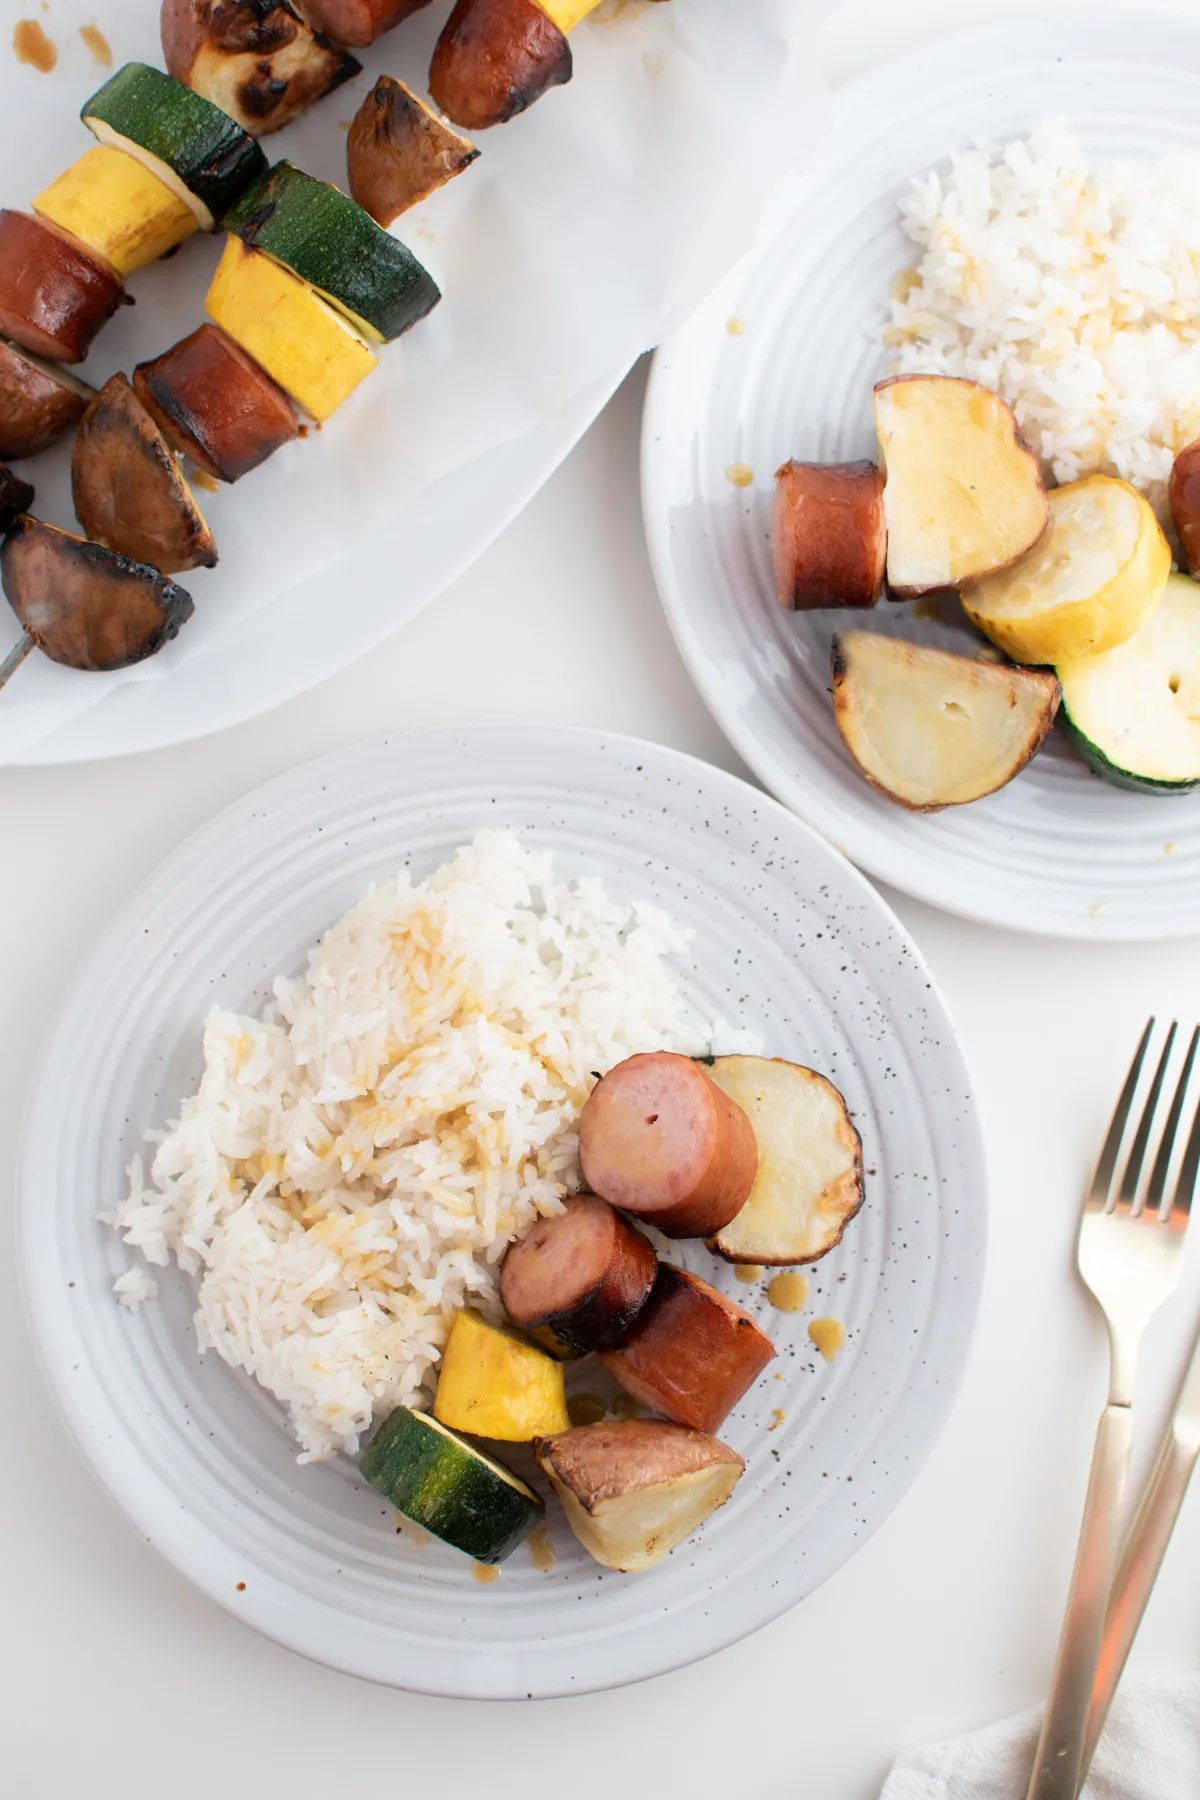 Two plates of grilled sausage, potatoes, squash, and rice on white table next to gold utensils.